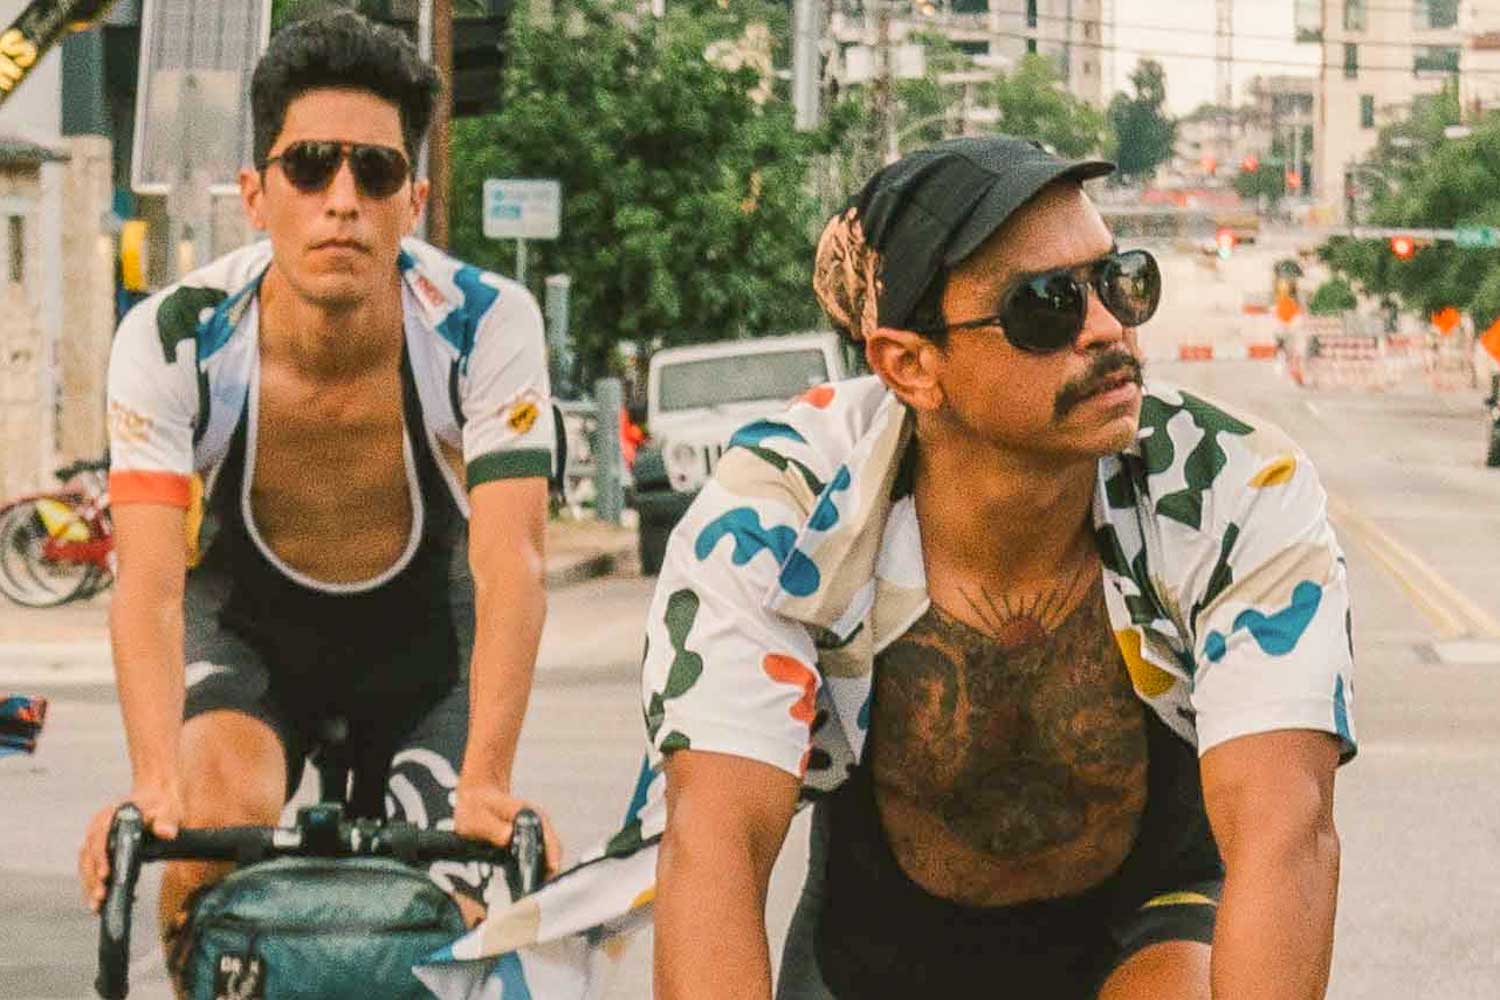 Tortoise_grey Two guys biking in the city wearing Ombraz classic armless rope sunglasses